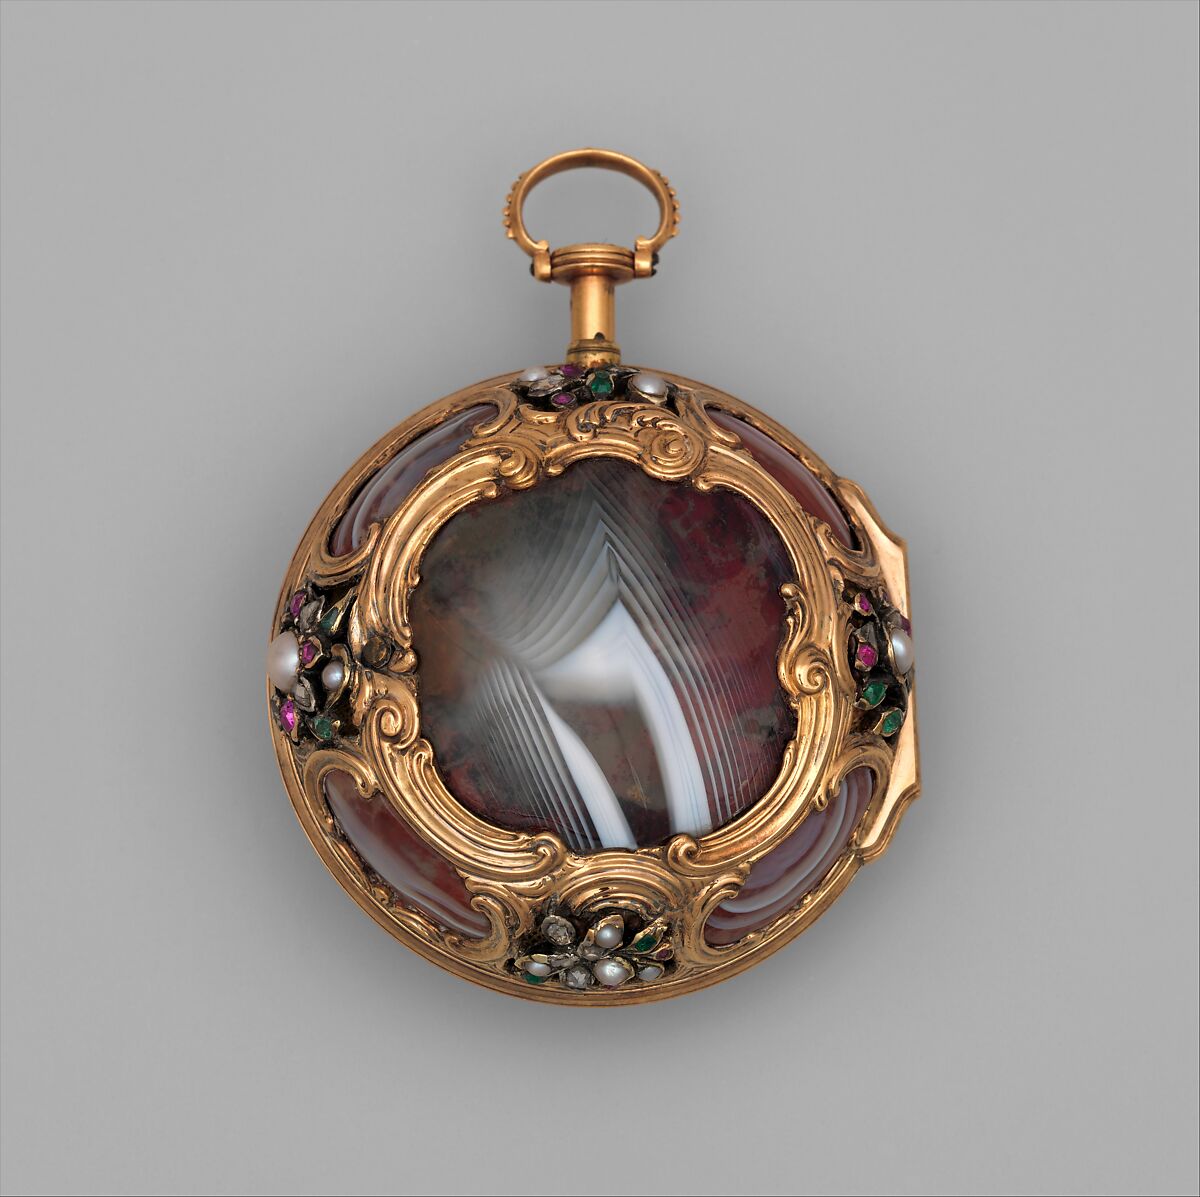 Pair-case repeating watch, Watchmaker: John Champion (British, 1730–1779), Outer case: glass and gold set with diamonds, pearls, emeralds, and rubies; Inner case: gold; Dial: white enamel with black painted Chinese characters and blued steel hands; Movement: gilded brass and partly blued steel, British, London, made for Chinese market 